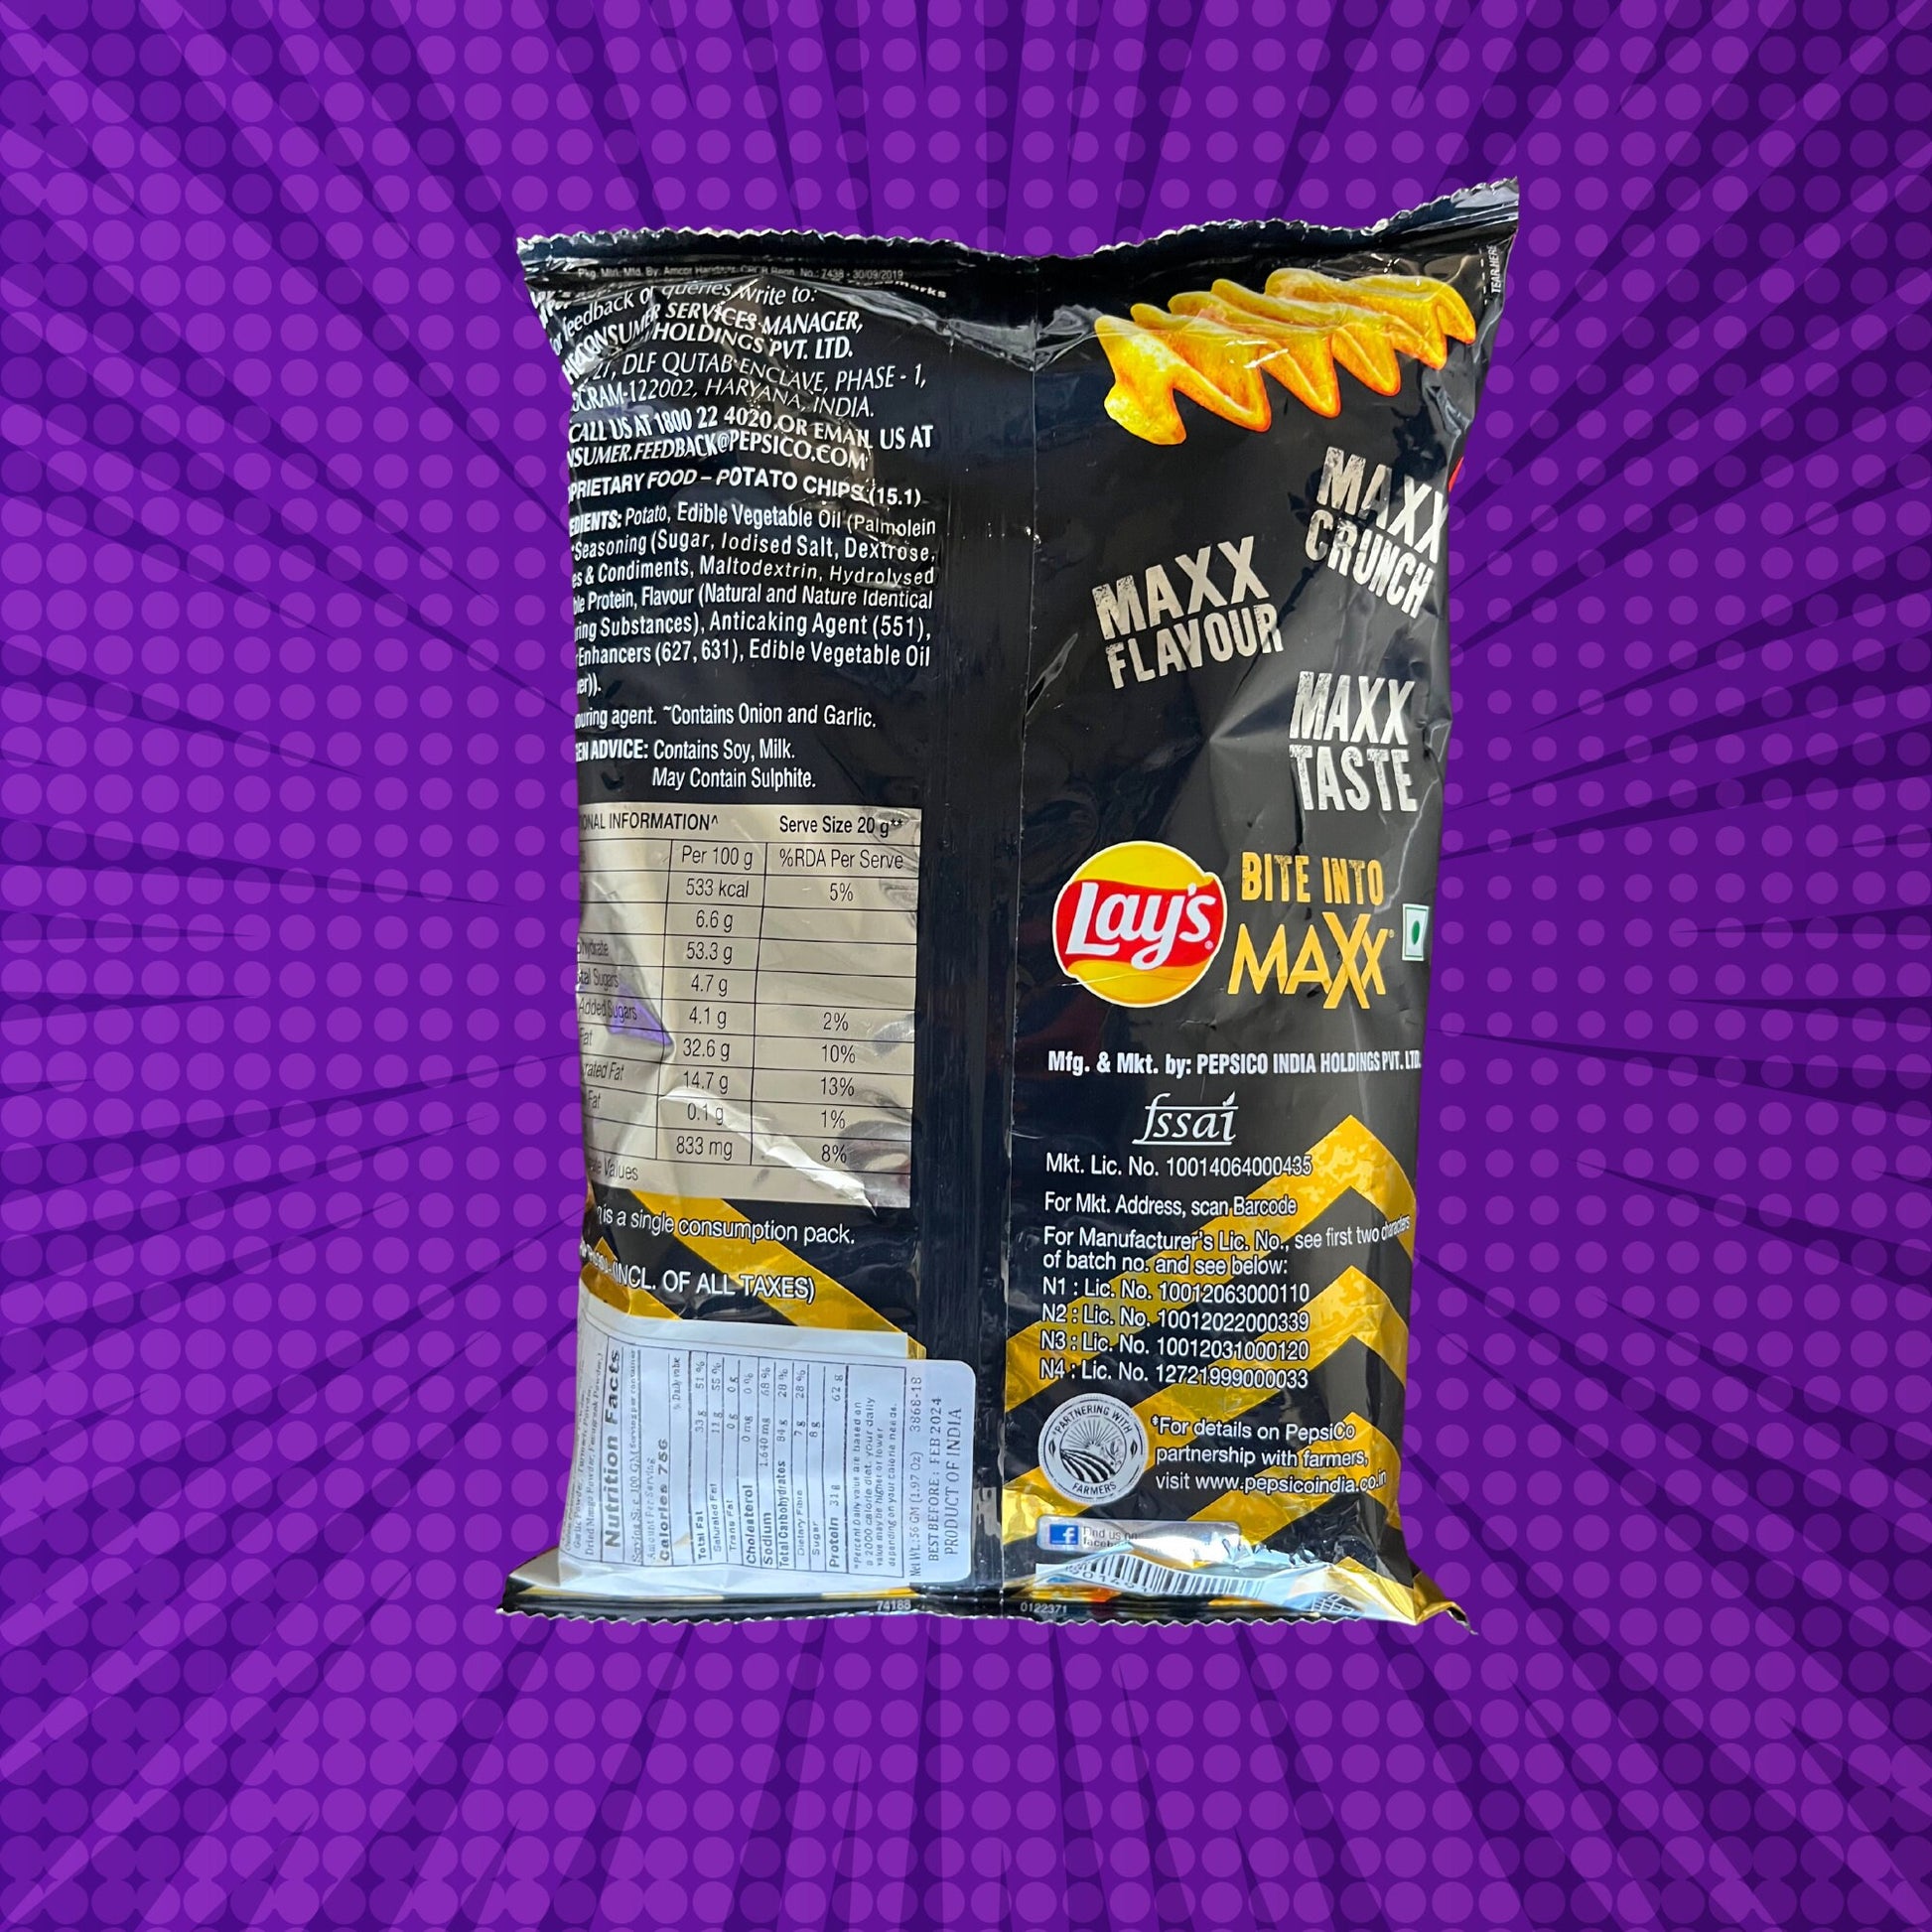 Lay's Maxx Sizzlin' BBQ Chips - Indian Lays (Back of Bag)